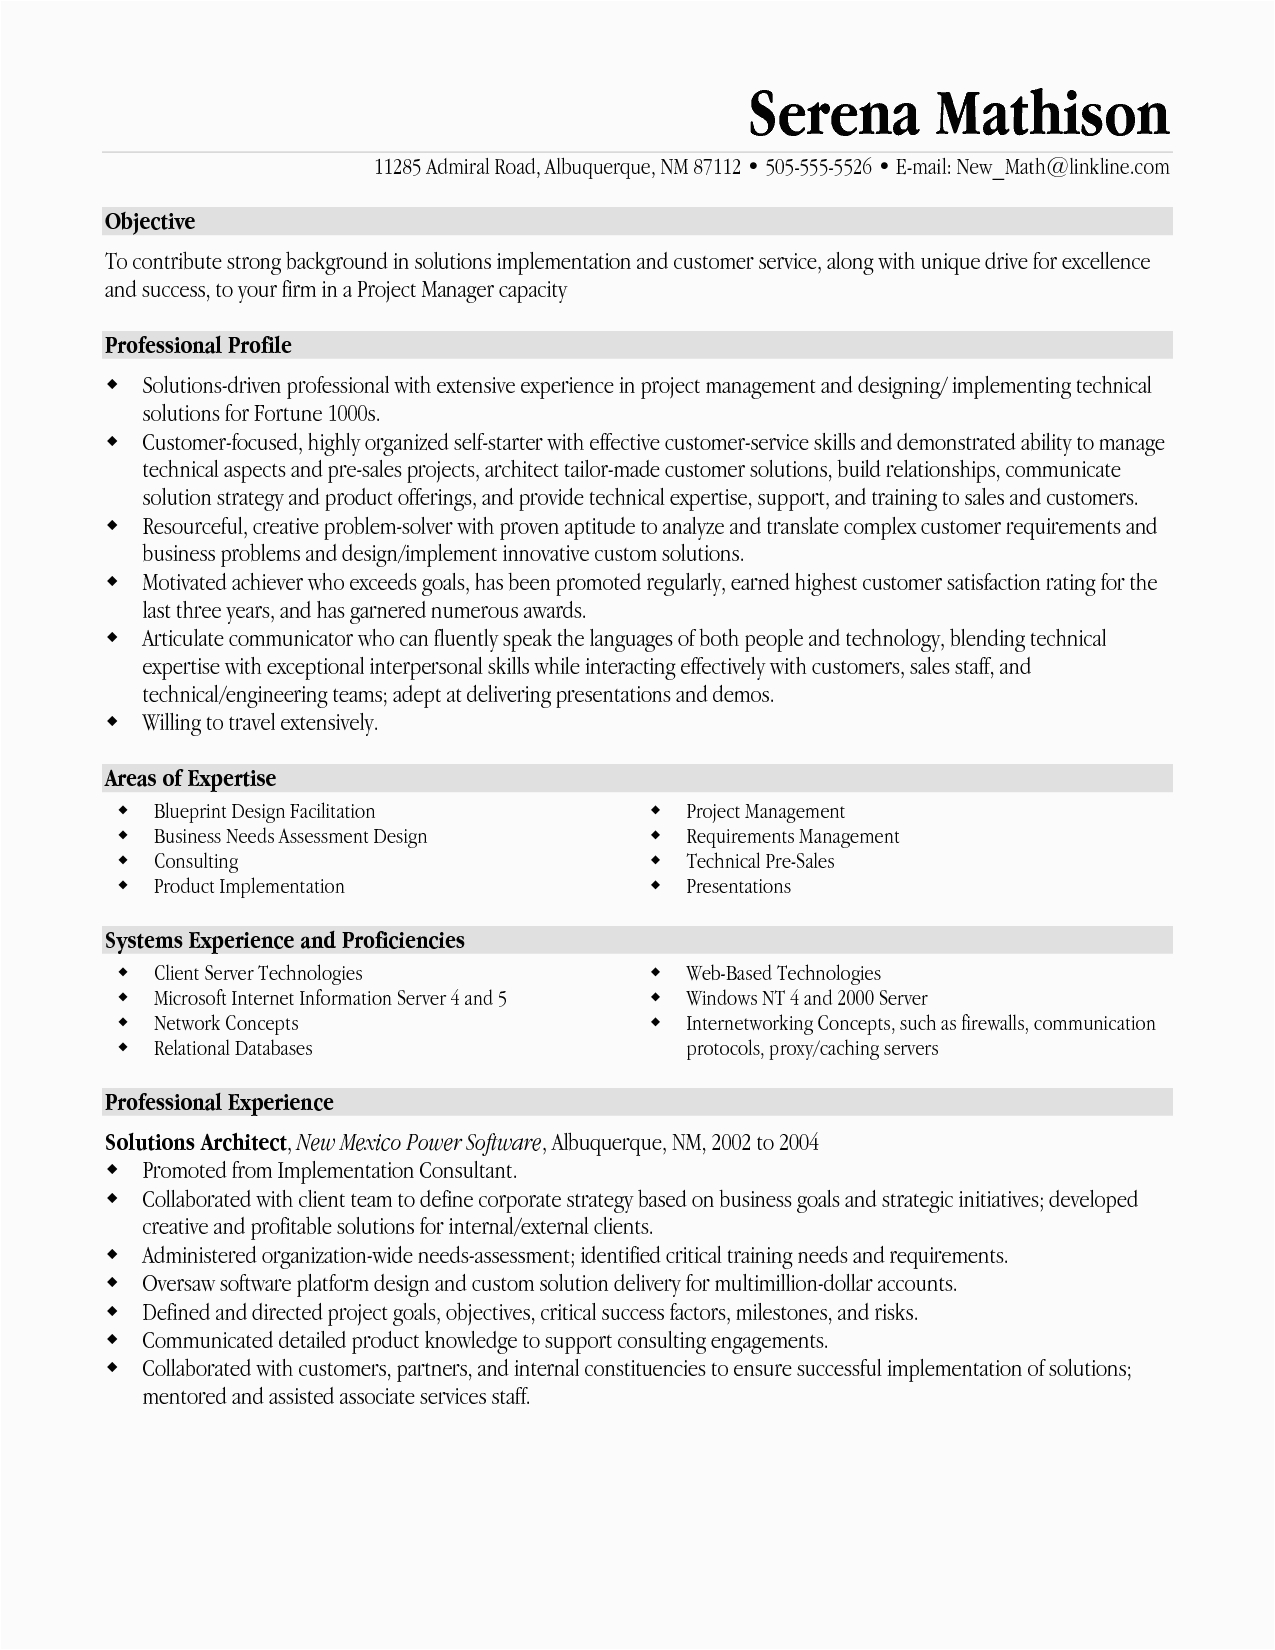 Sample Resume Objective Statements for Project Manager Project Management Resume